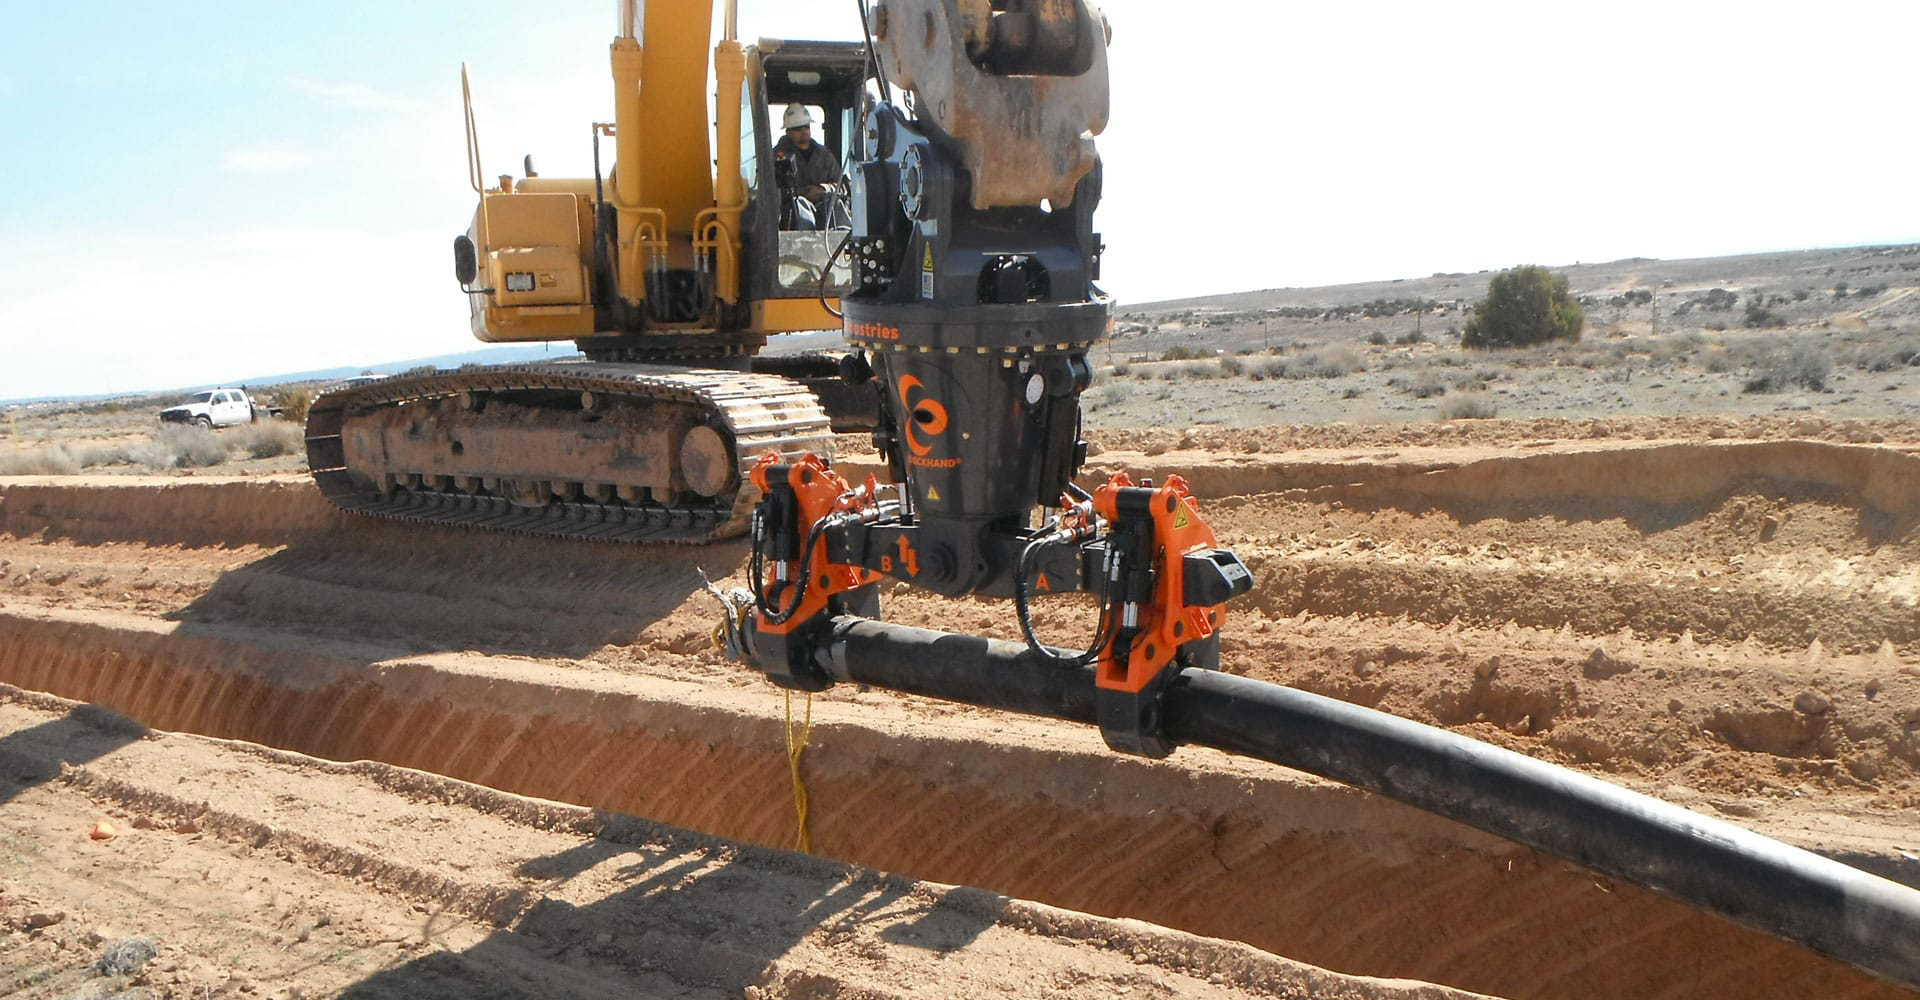 The DECKHAND® system in action! In this image a DECKHAND® is attached to an excavator. Outfitted with Interchangeable Material Handling Arms, the DECKHAND® makes quick work of handling flexible pipe around a job site.